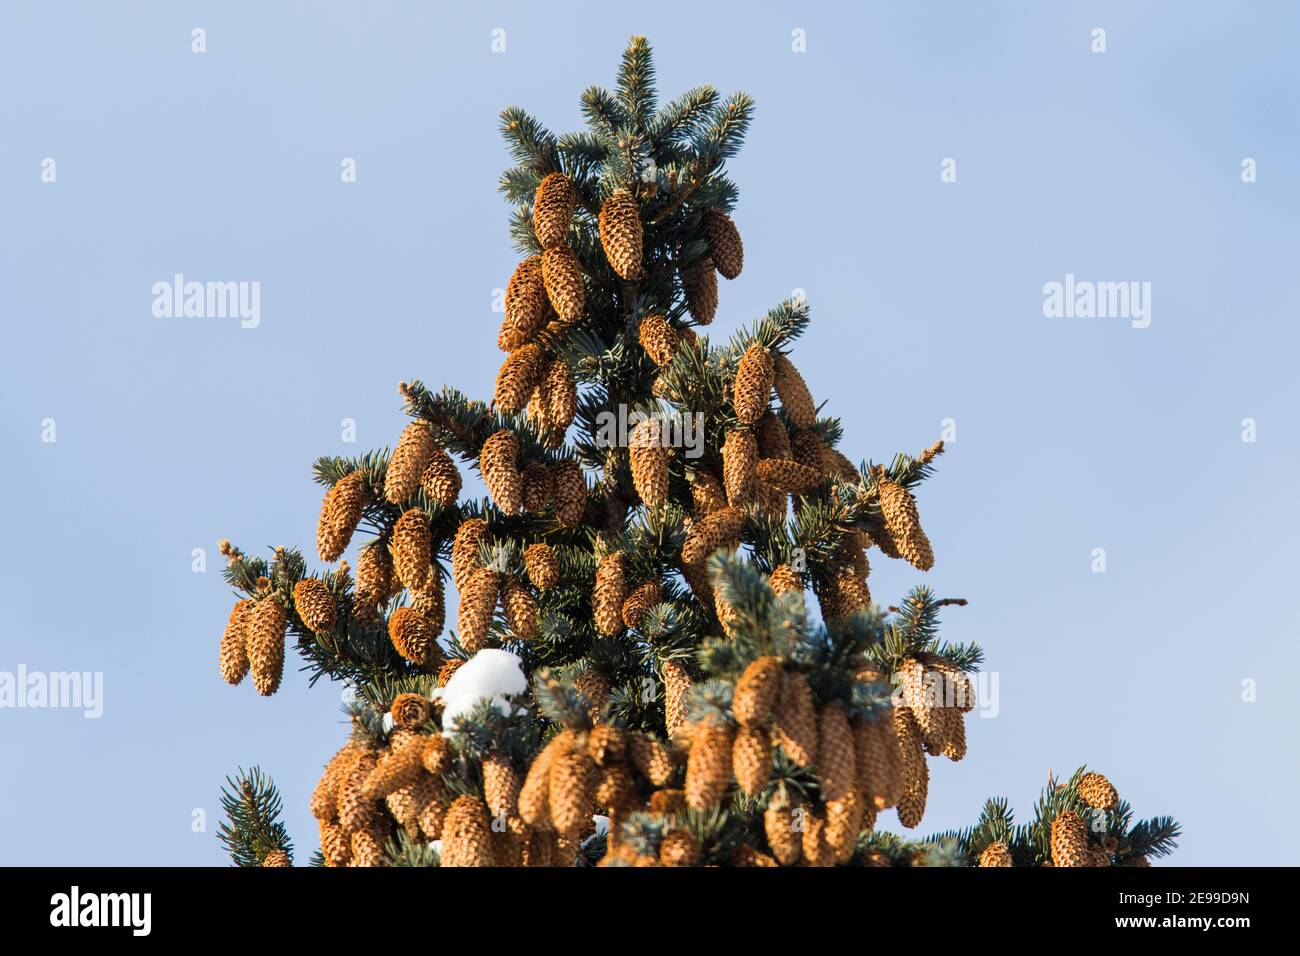 Abies concolor, the white fir in winter Stock Photo